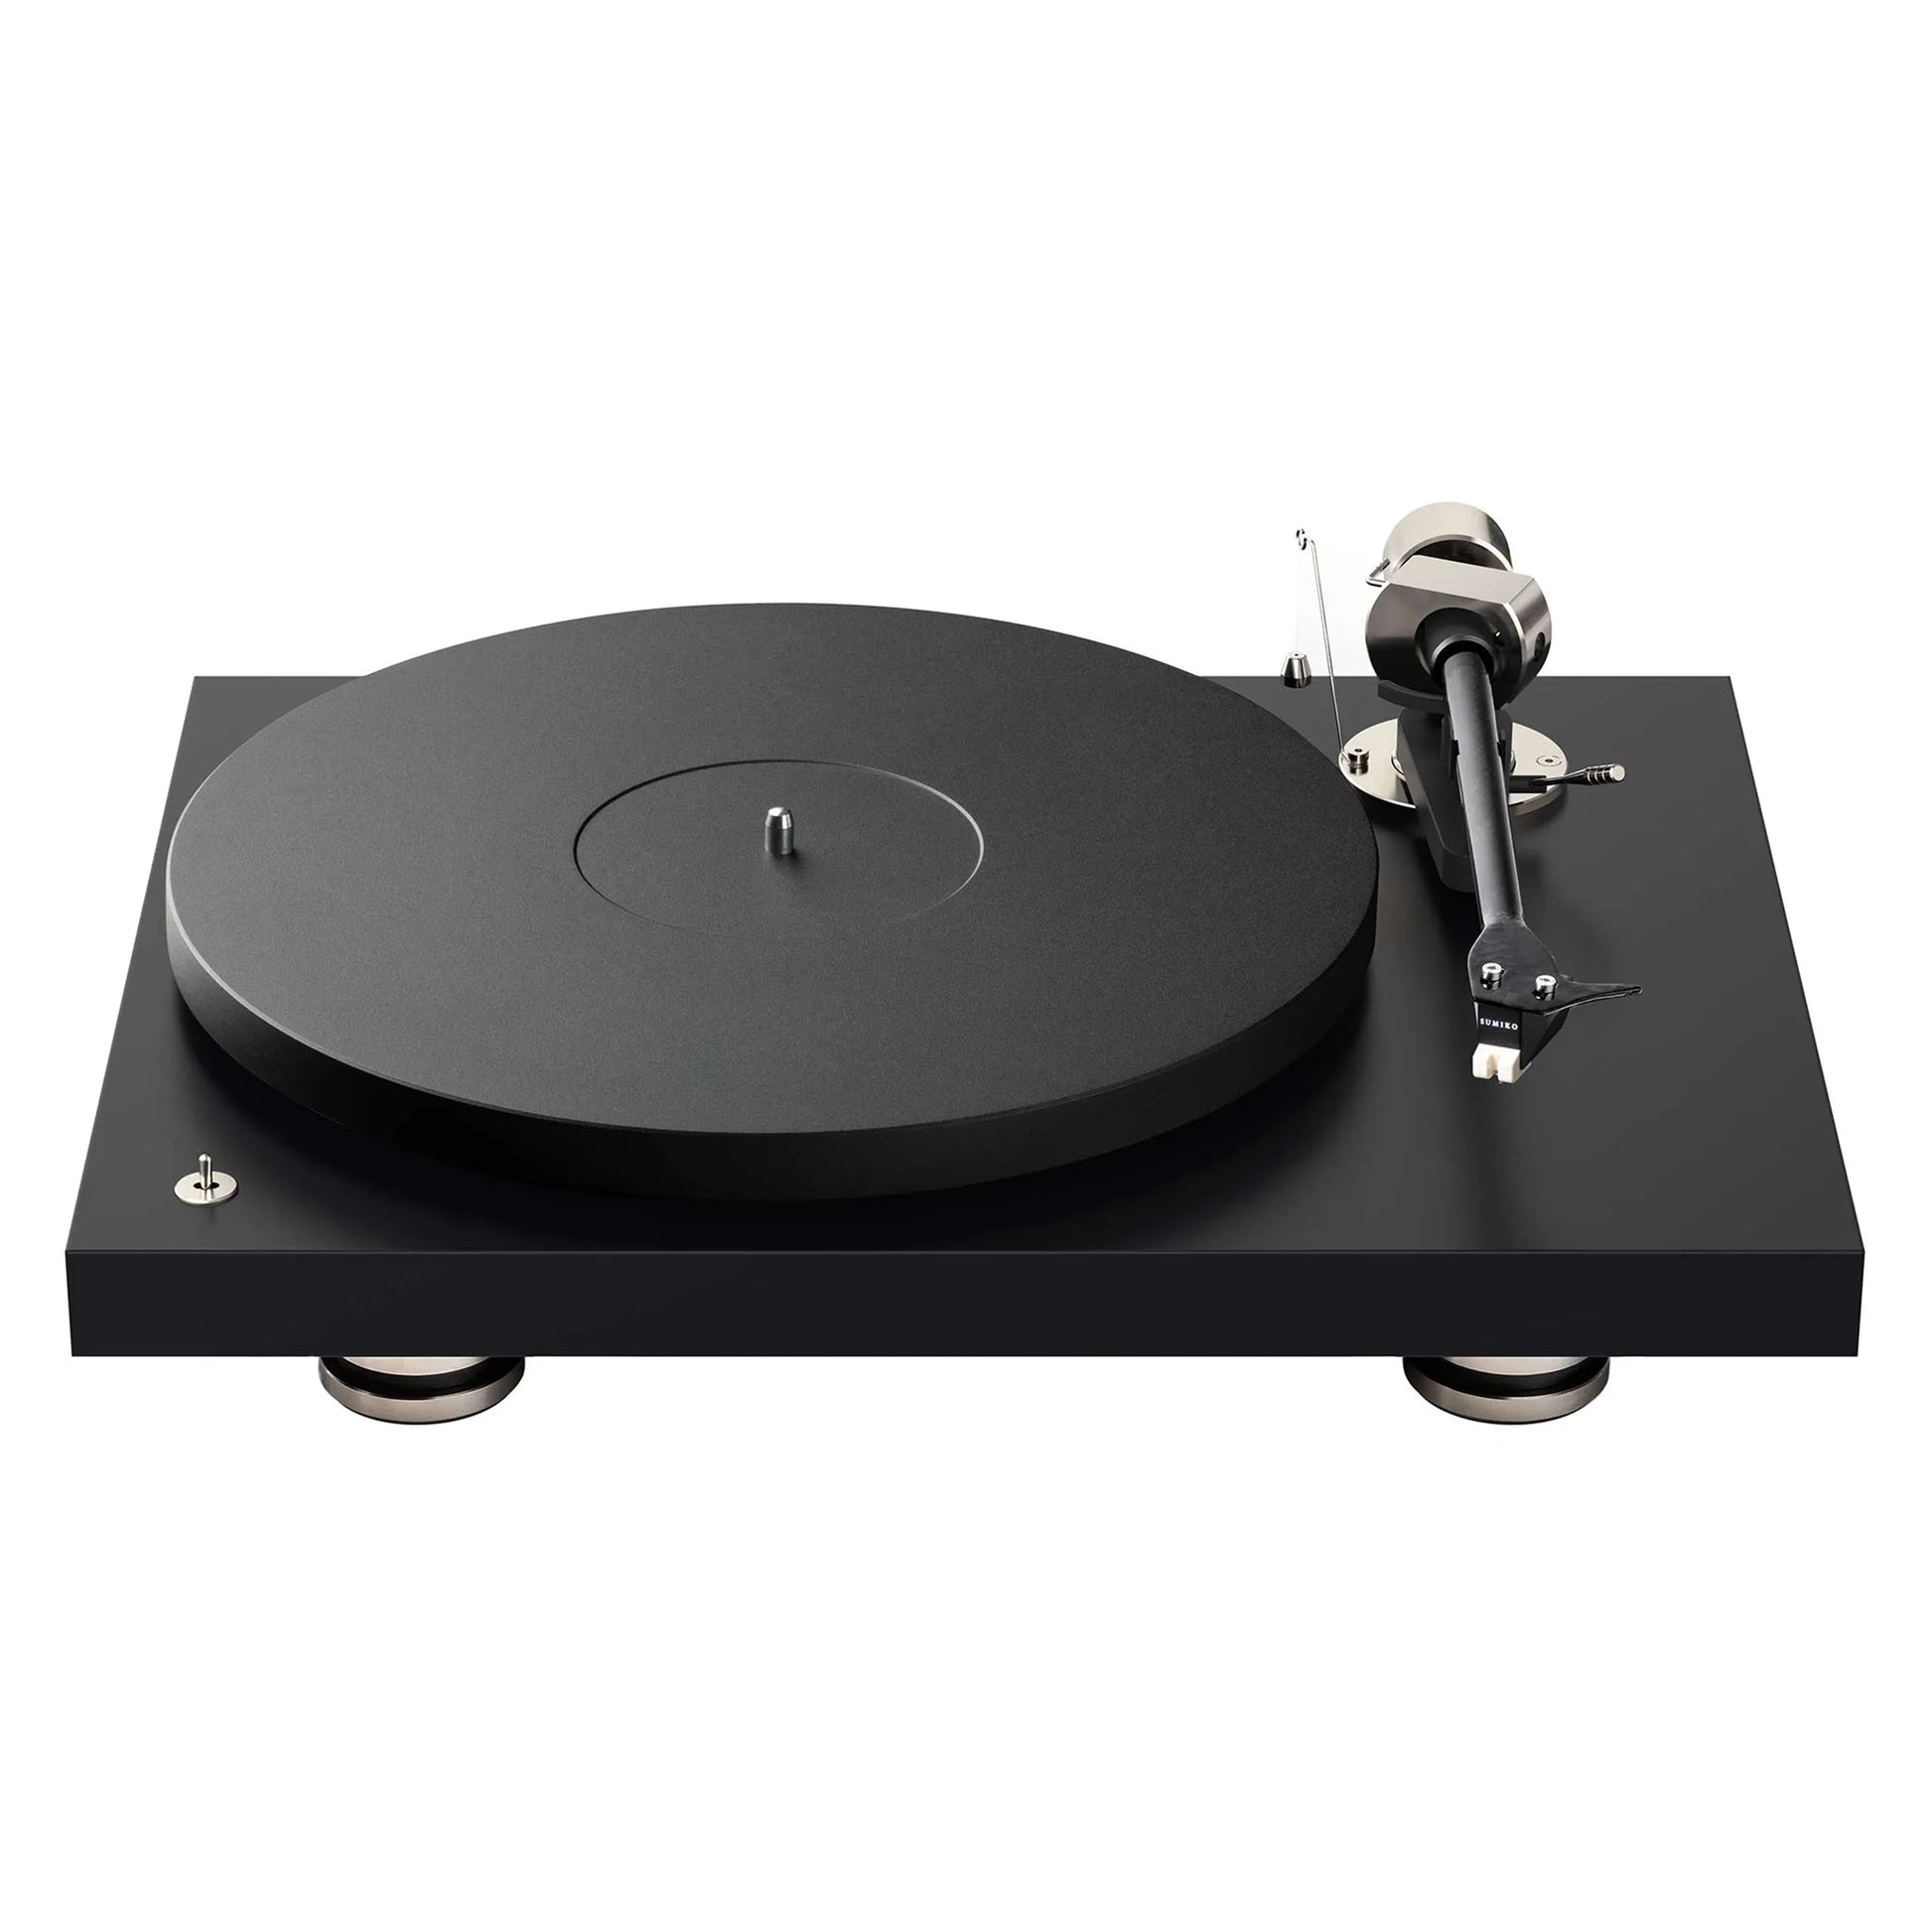 Pro Ject Audio Systems Store 